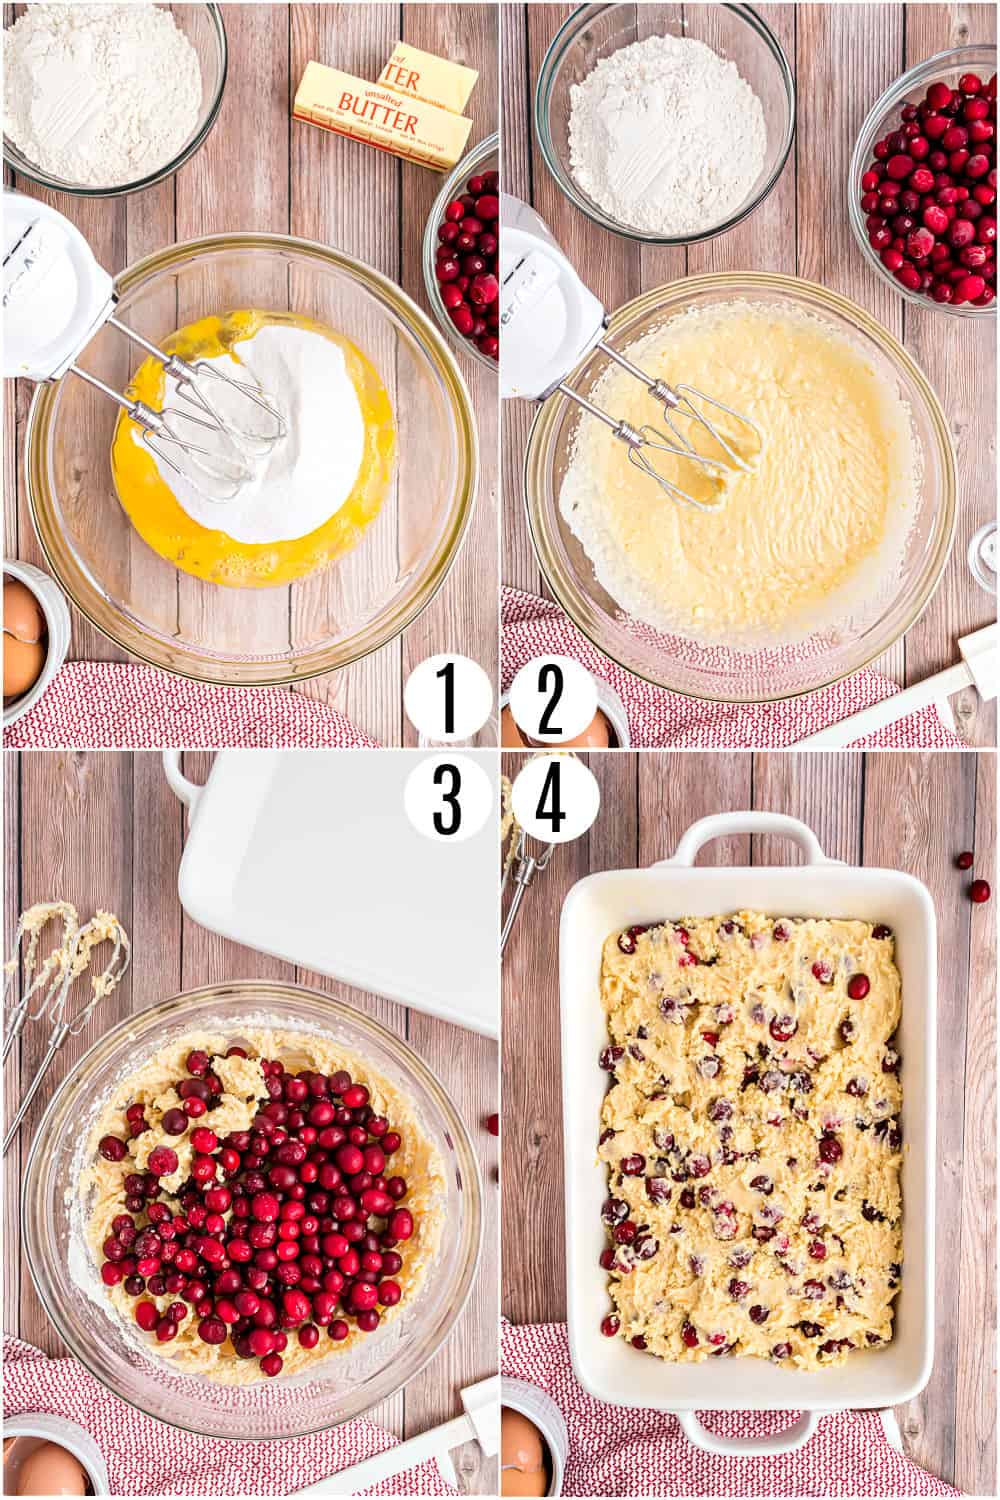 Step by step photos showing how to make cranberry cake for the holidays.